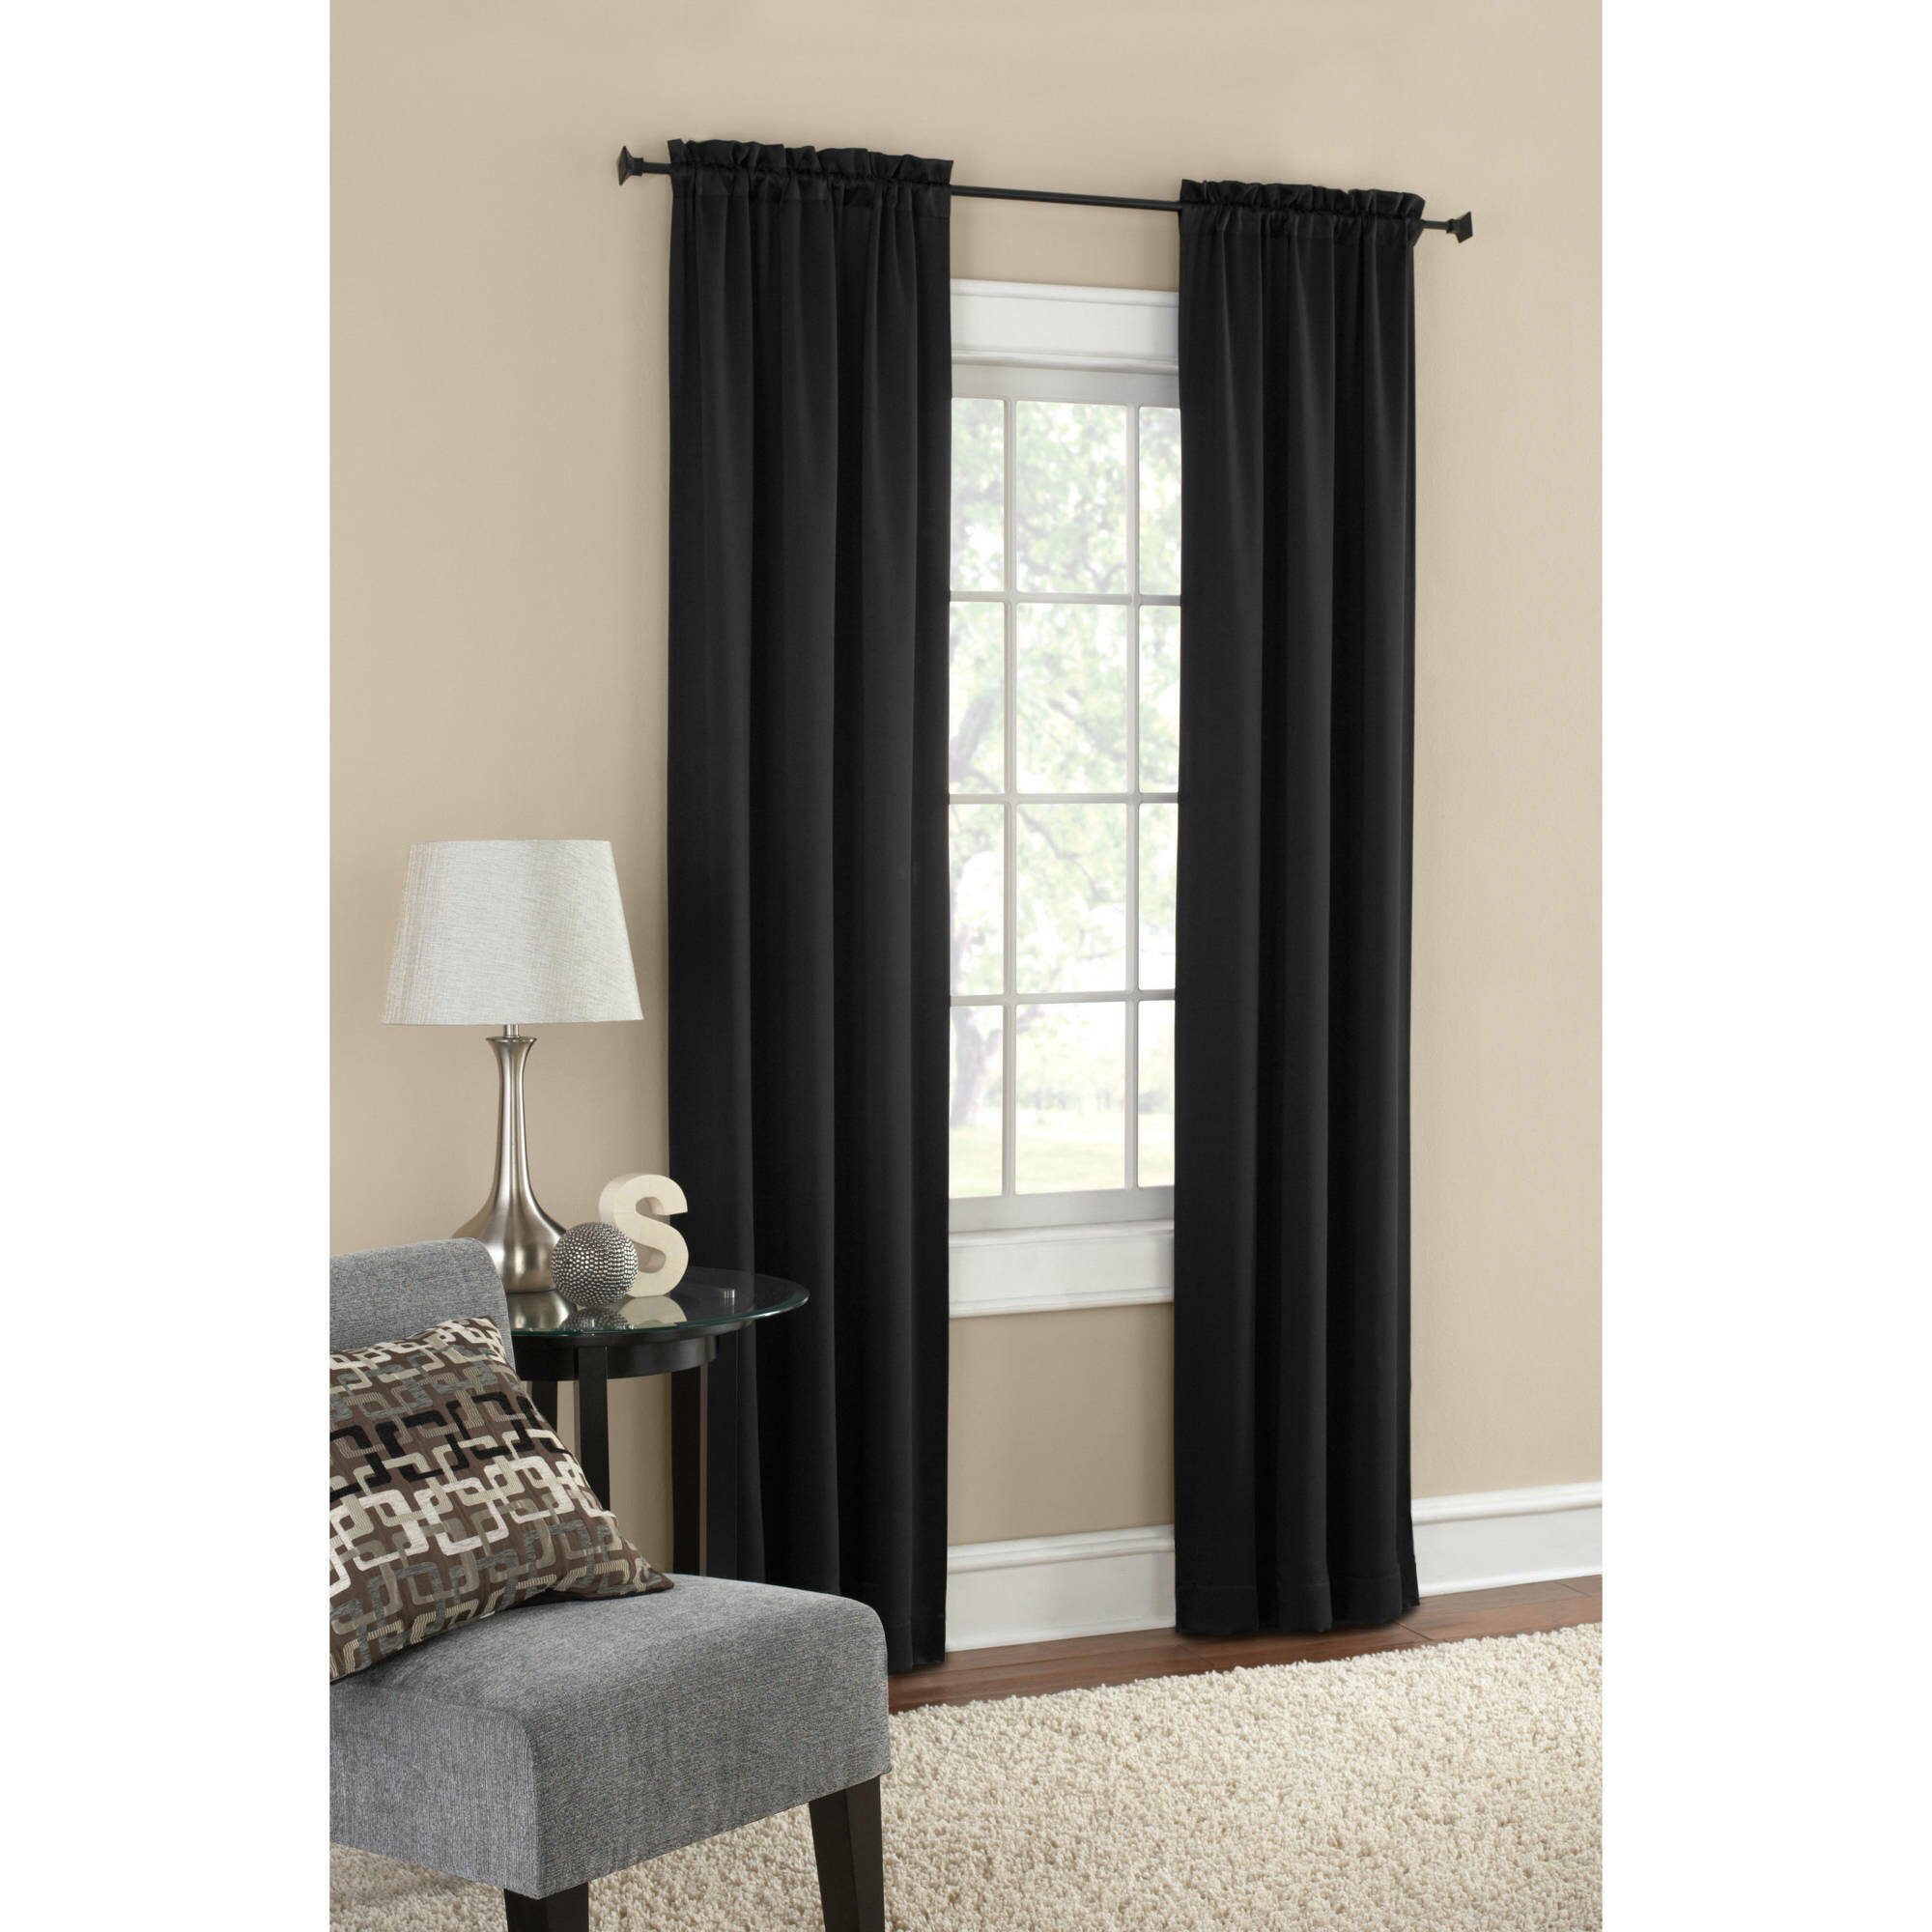 Drapes with Blackout Lining | Low Priced Curtains | Cheap Blackout Curtains